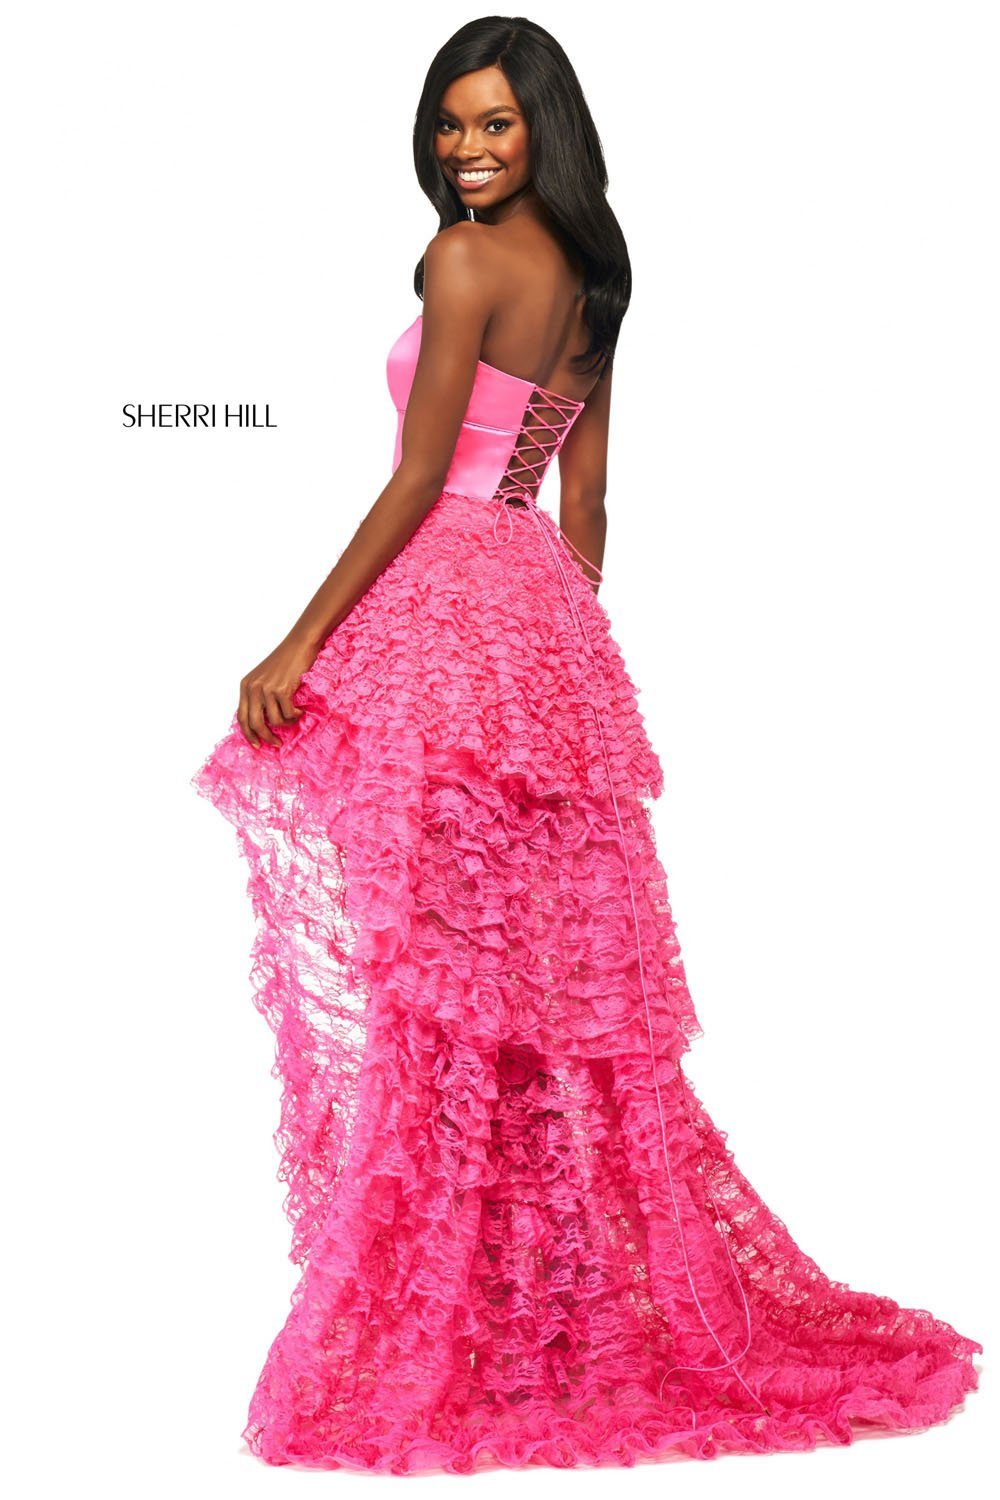 Sherri Hill 53720 dress images in these colors: Black, Coral, Blush, Candy Pink, Ivory, Red.